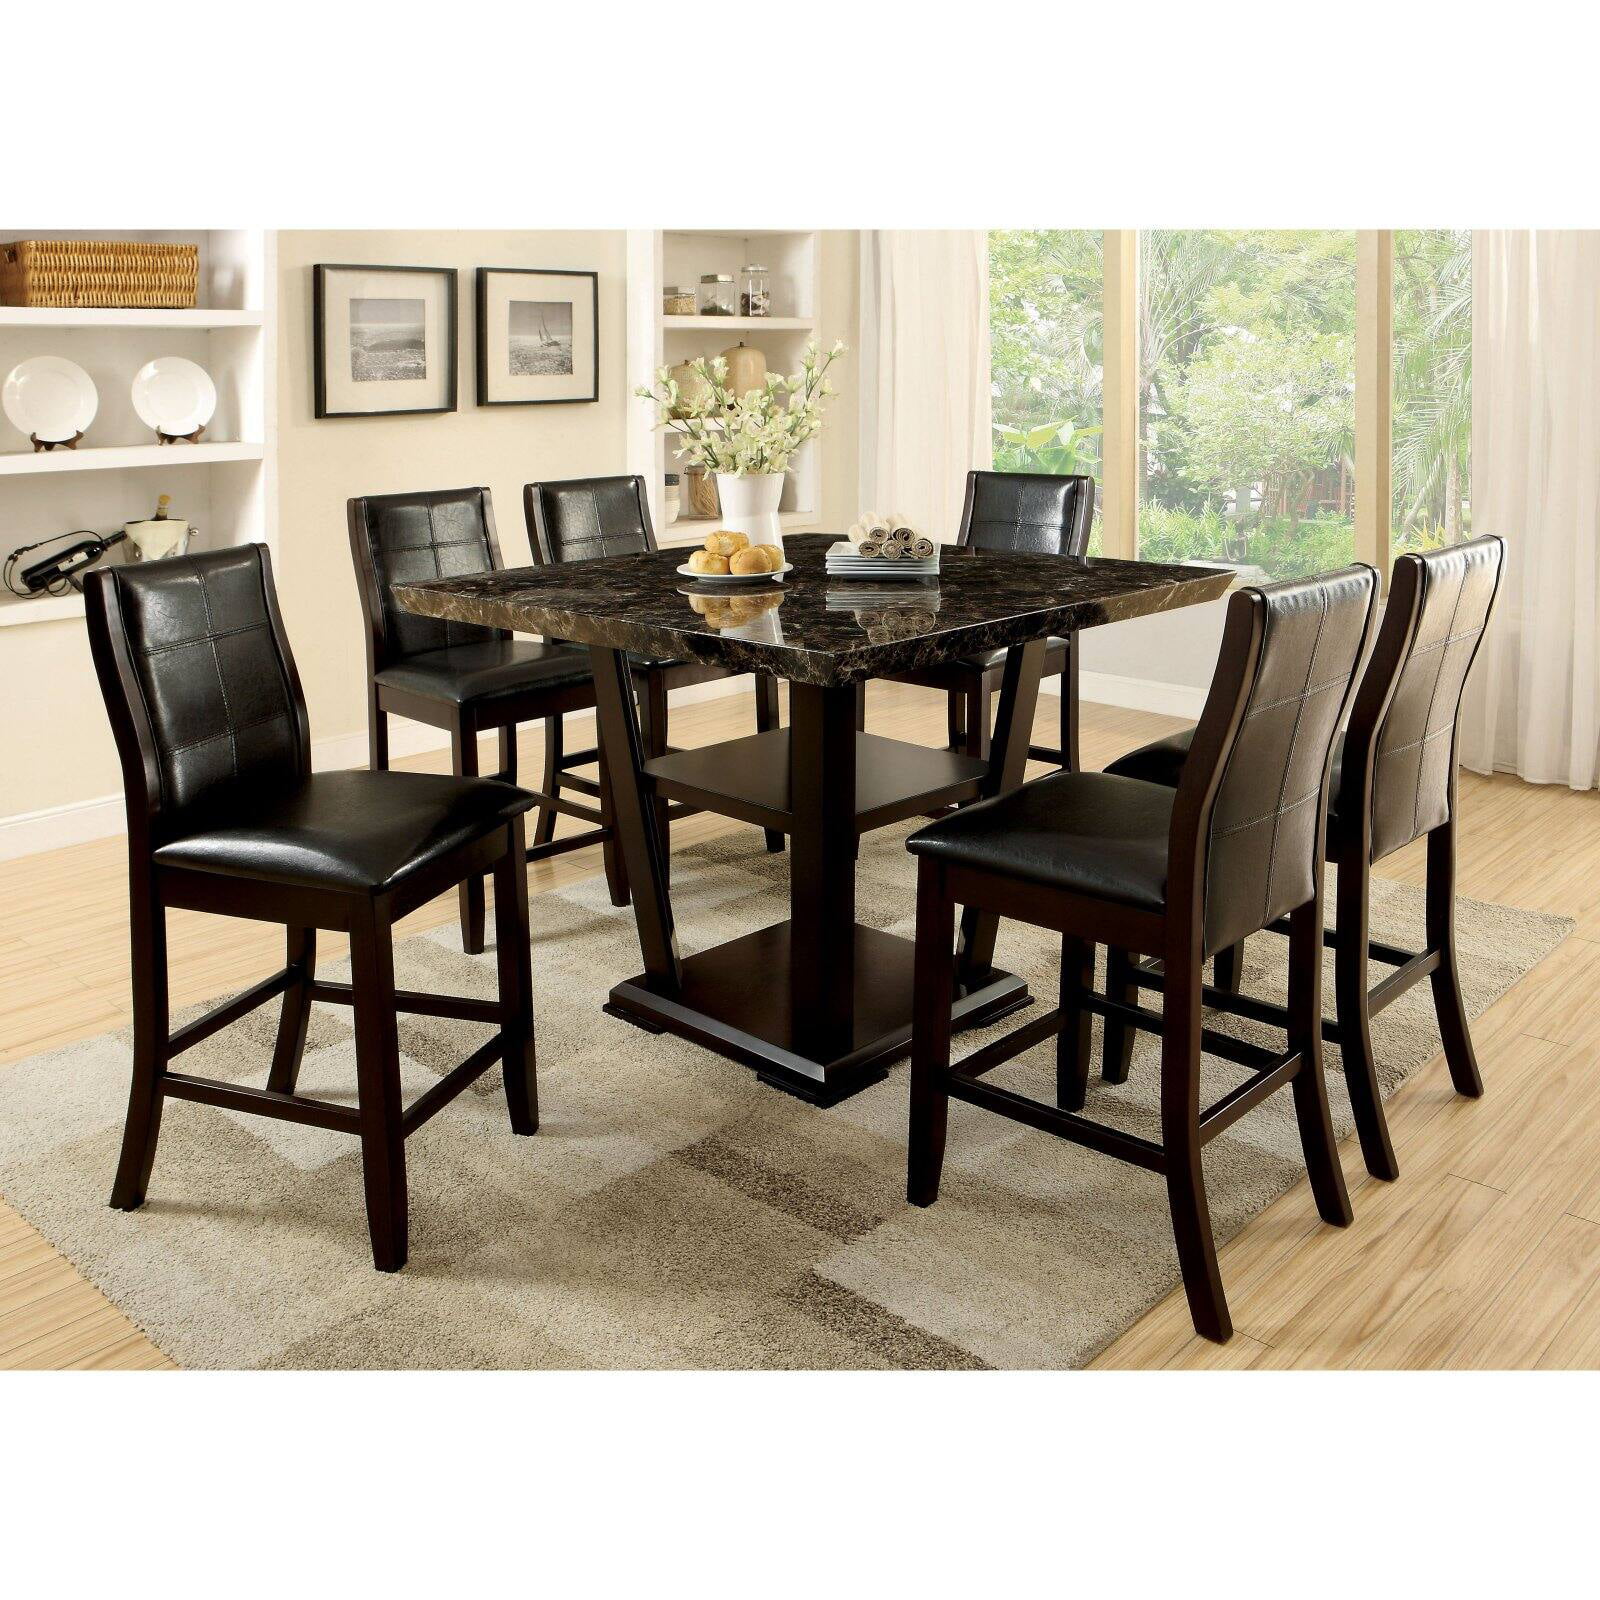 Faux Marble Dining Table Set, 7 Pc Dining Room Table Sets